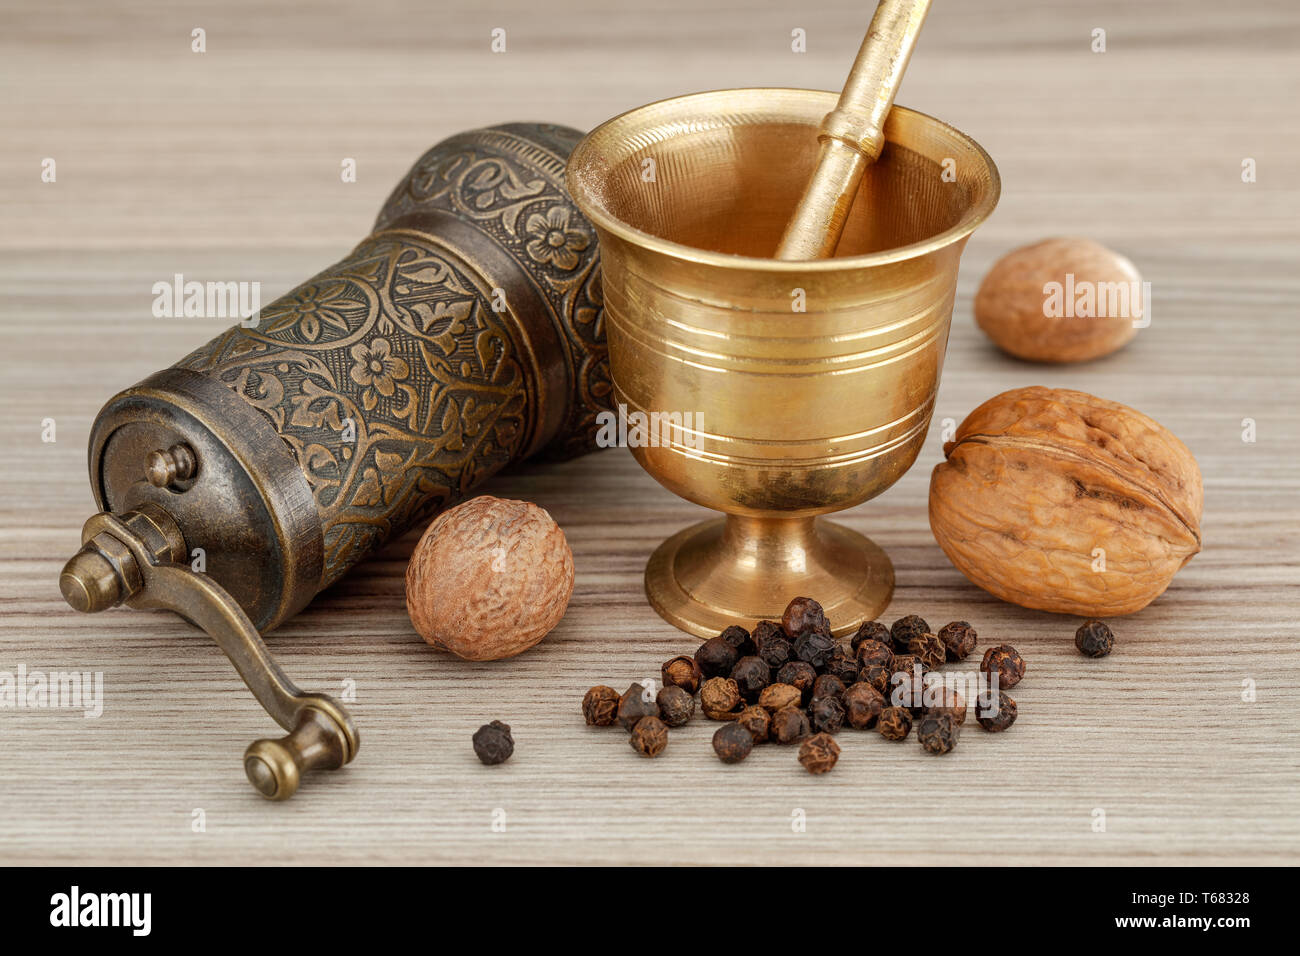 Kitchen spice hand mill and bronze muller grinder on wooden background  Stock Photo - Alamy